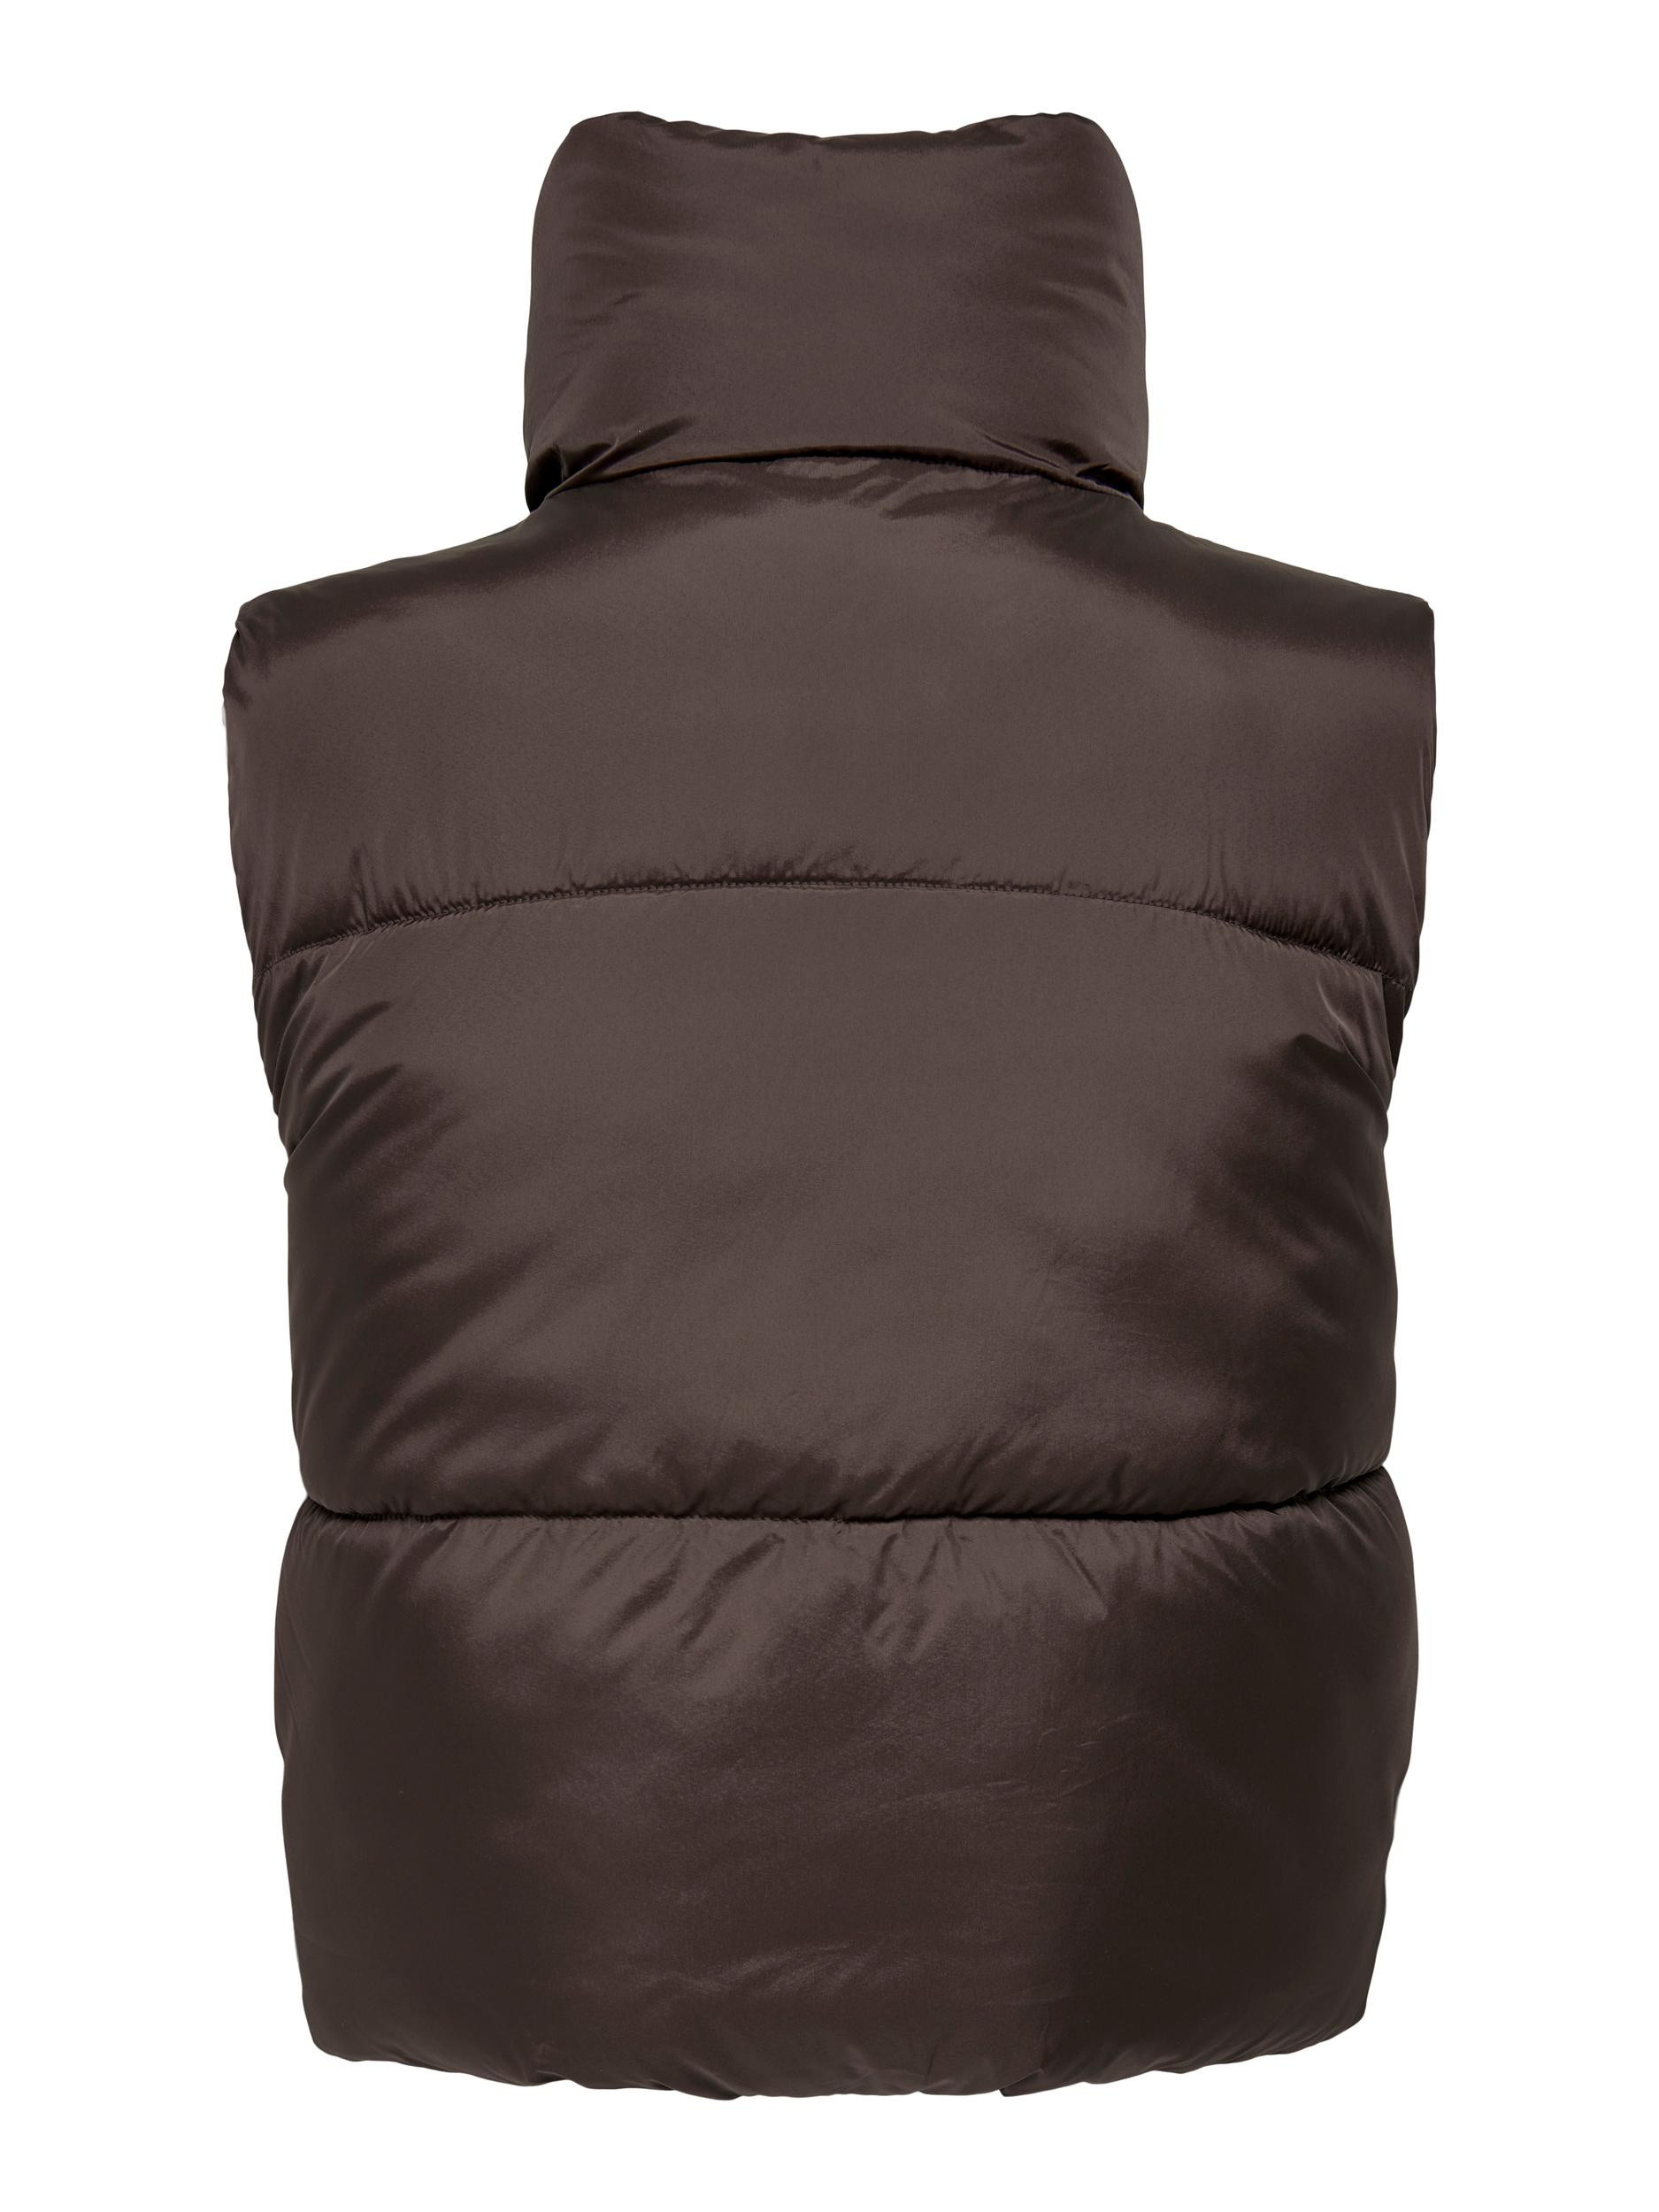 Only - Reversible quilted gilet, Brown, large image number 1